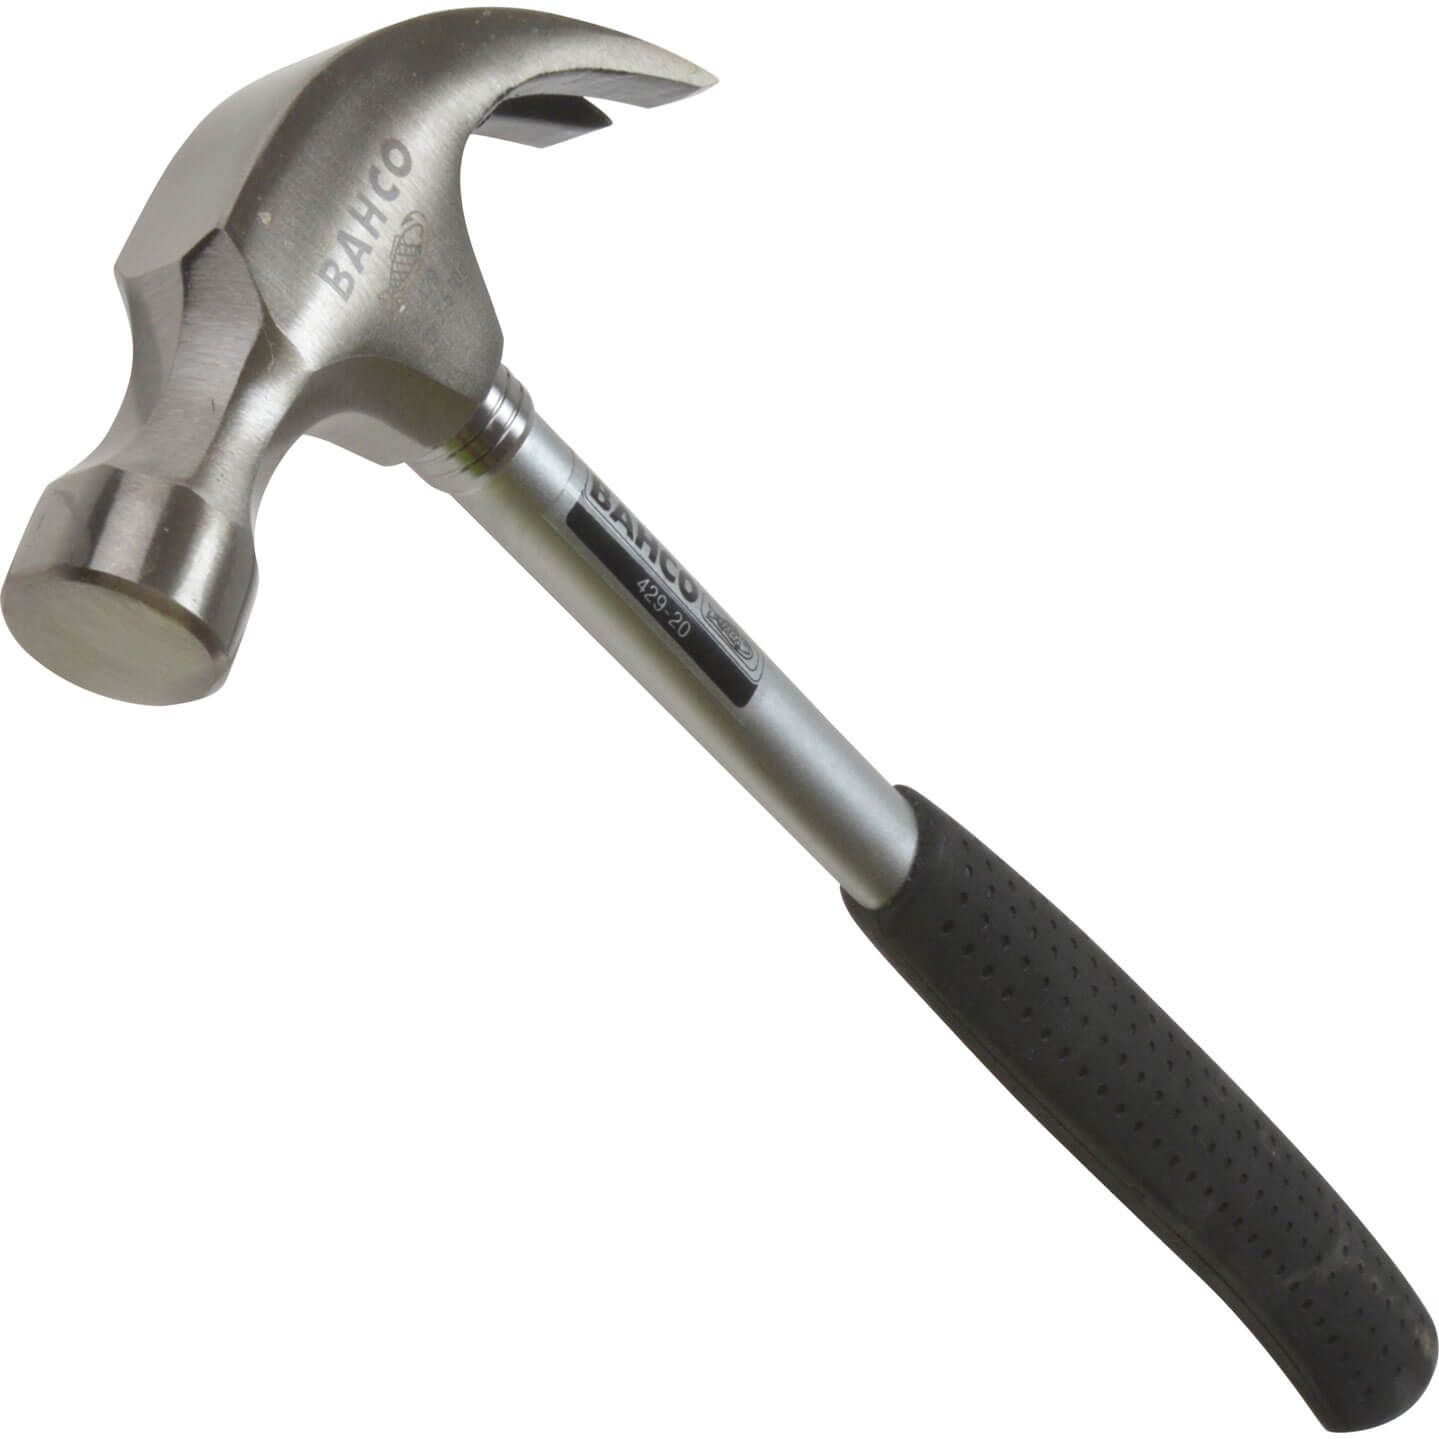 Image of Bahco Claw Hammer Steel Handle 20oz